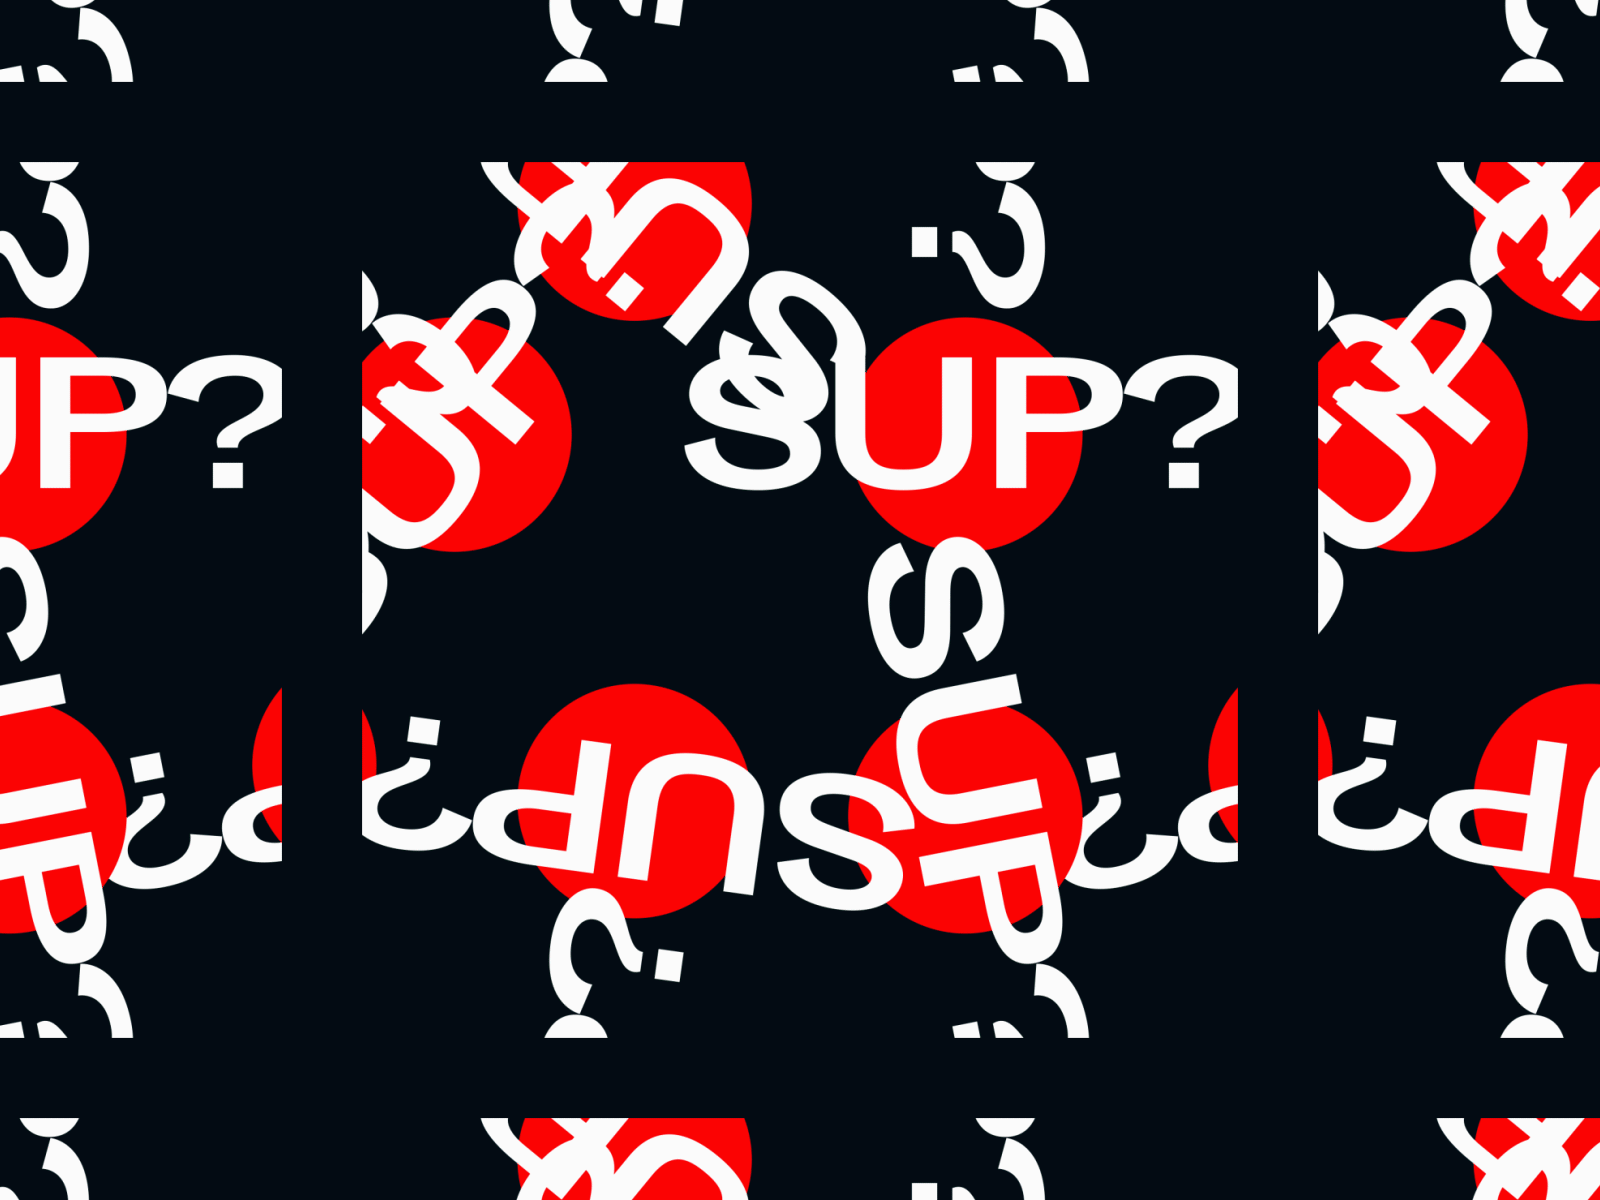 SUP? - Animation Loop aae aftereffects animation art brand branding design dots graphic design identity kinetic kinetic typography kinetictype loop motion motion design motion graphics move movement vector